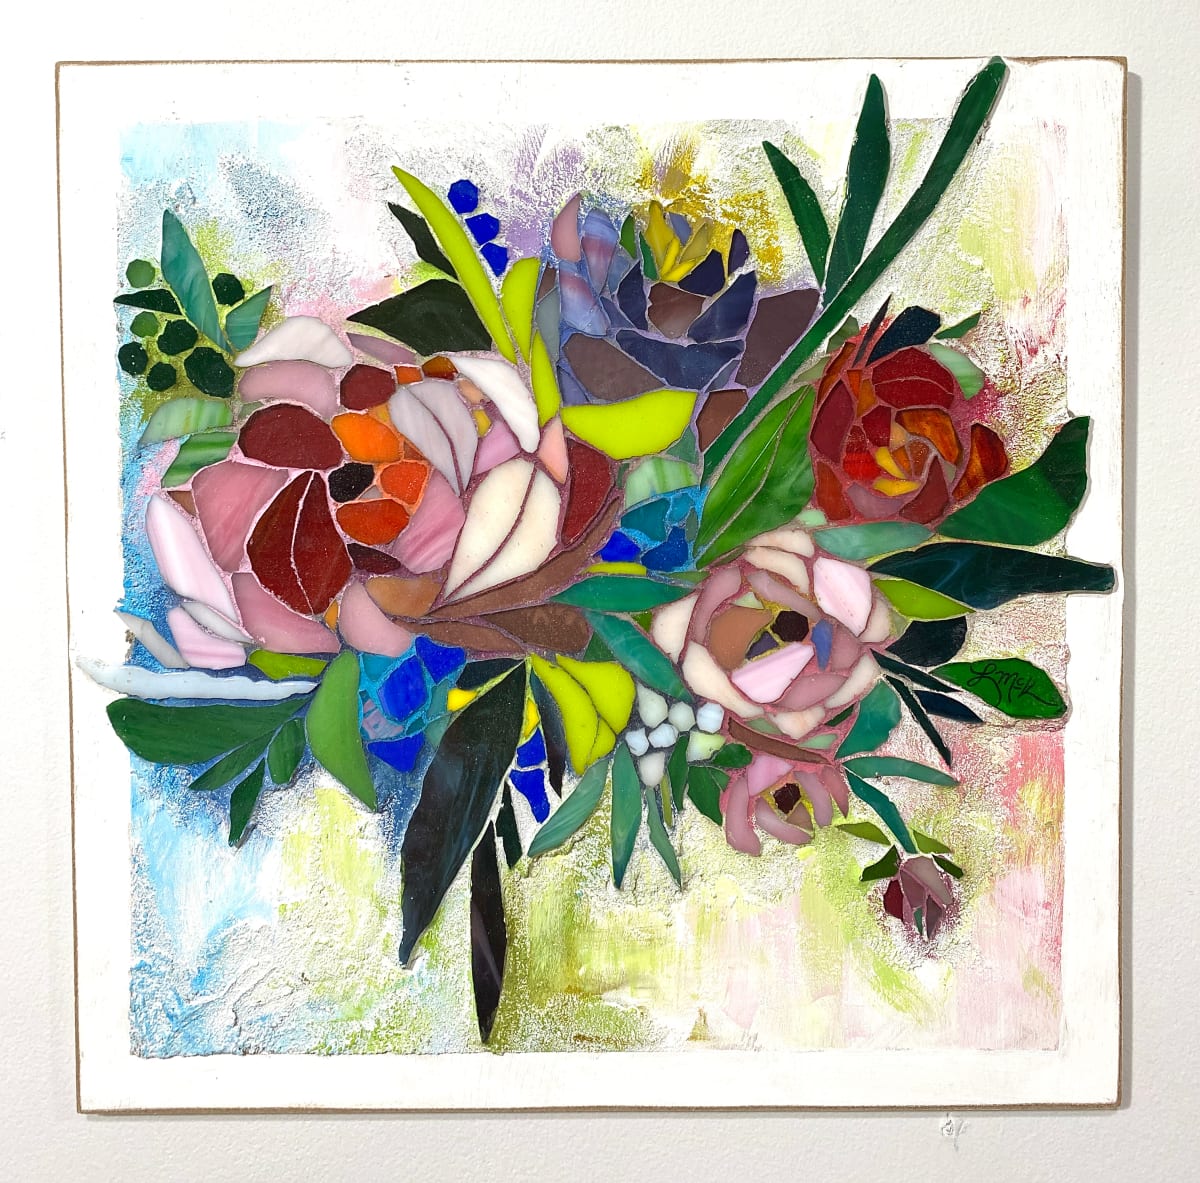 Contentment by Laura McKellar  Image: An abstract multi-floral bouquet in stained glass and painted grout